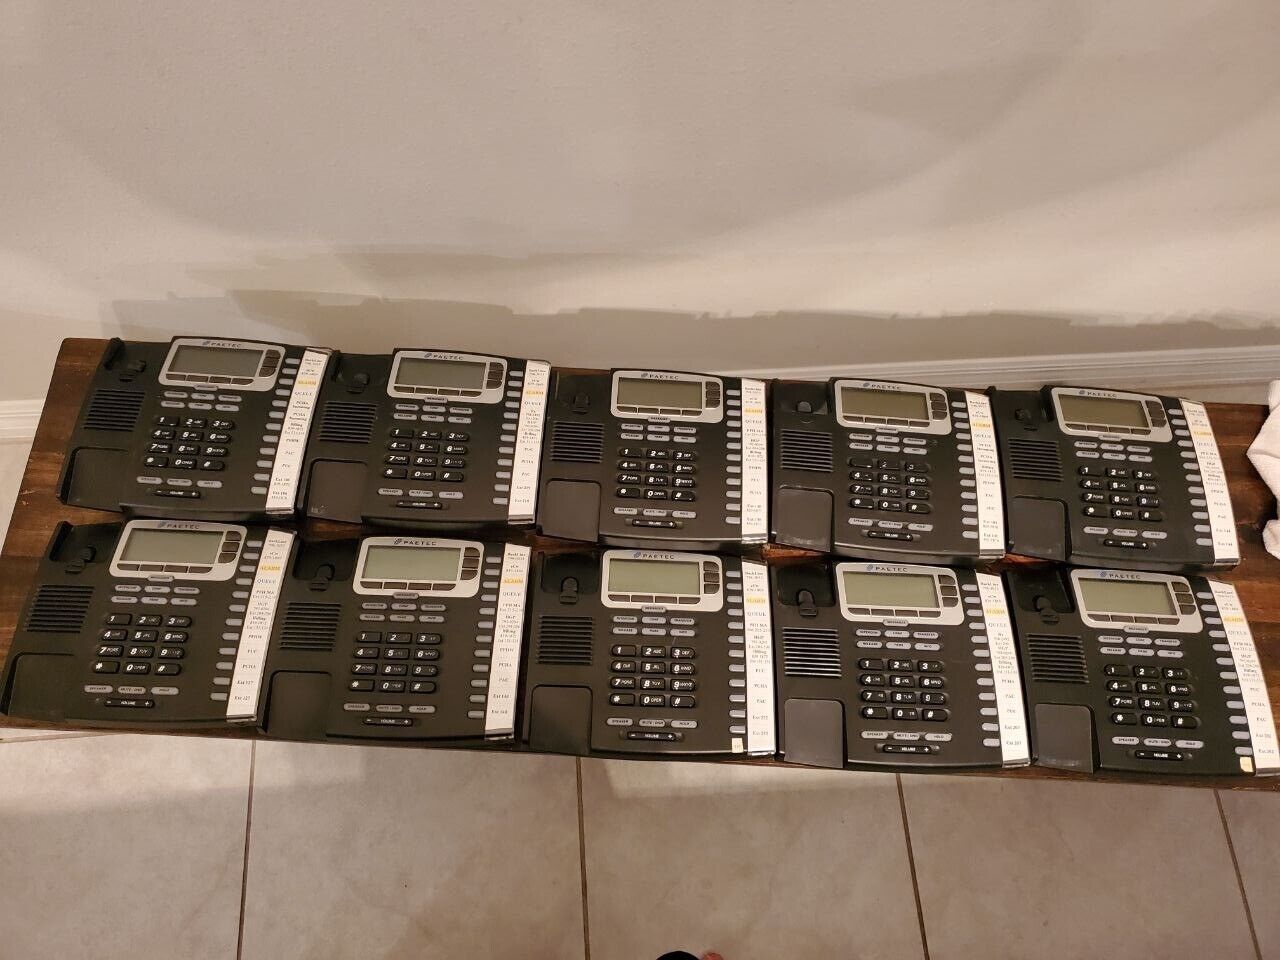 Allworx Paetec 9212P 8110051 Voip Display Phone - LOT OF 15 With Handset & Stand